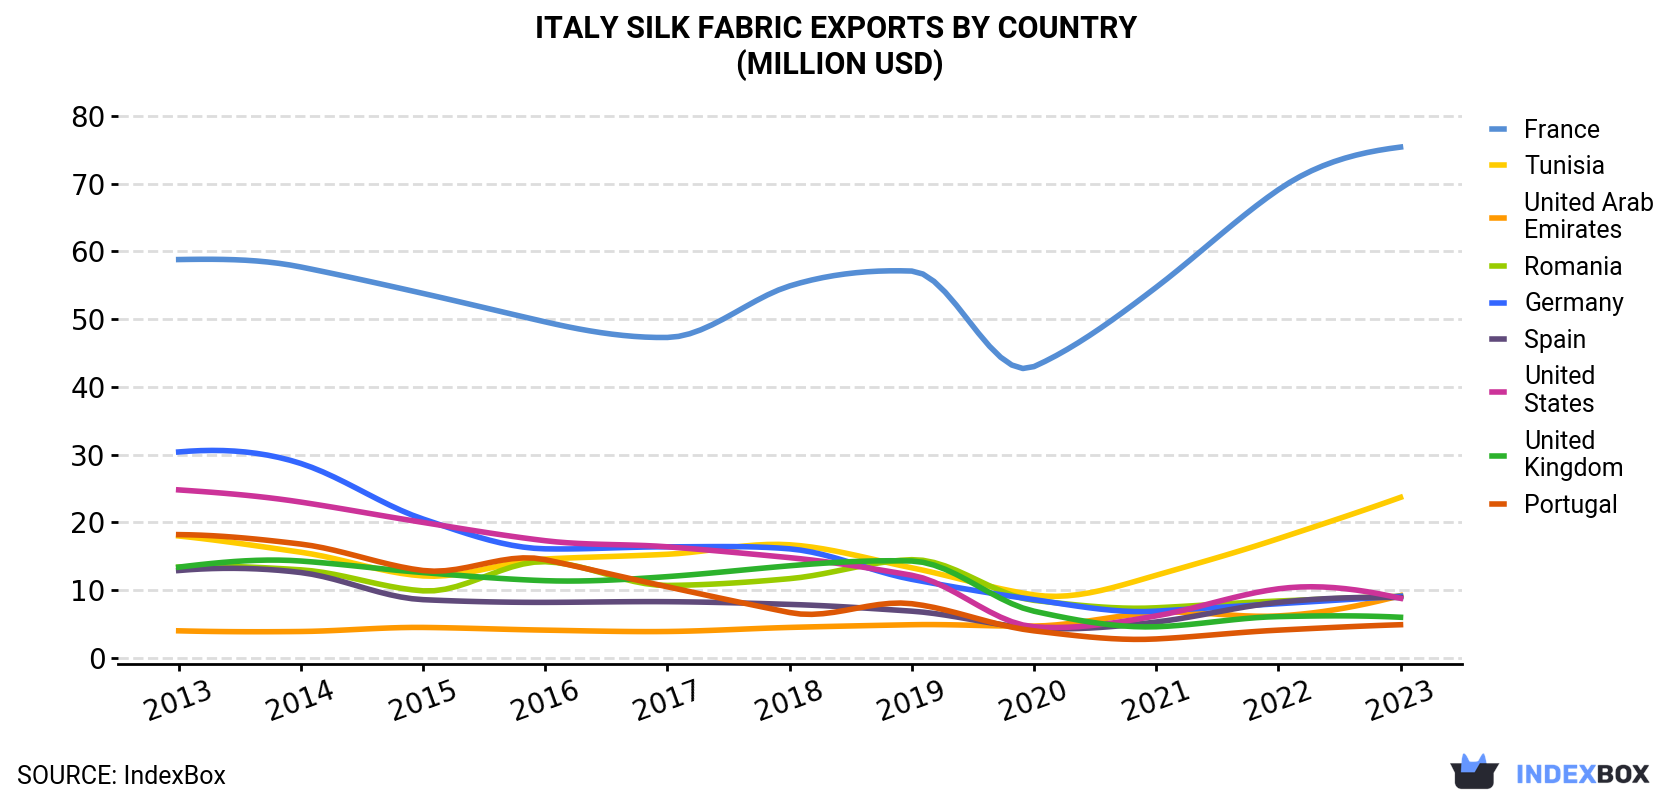 Italy Silk Fabric Exports By Country (Million USD)